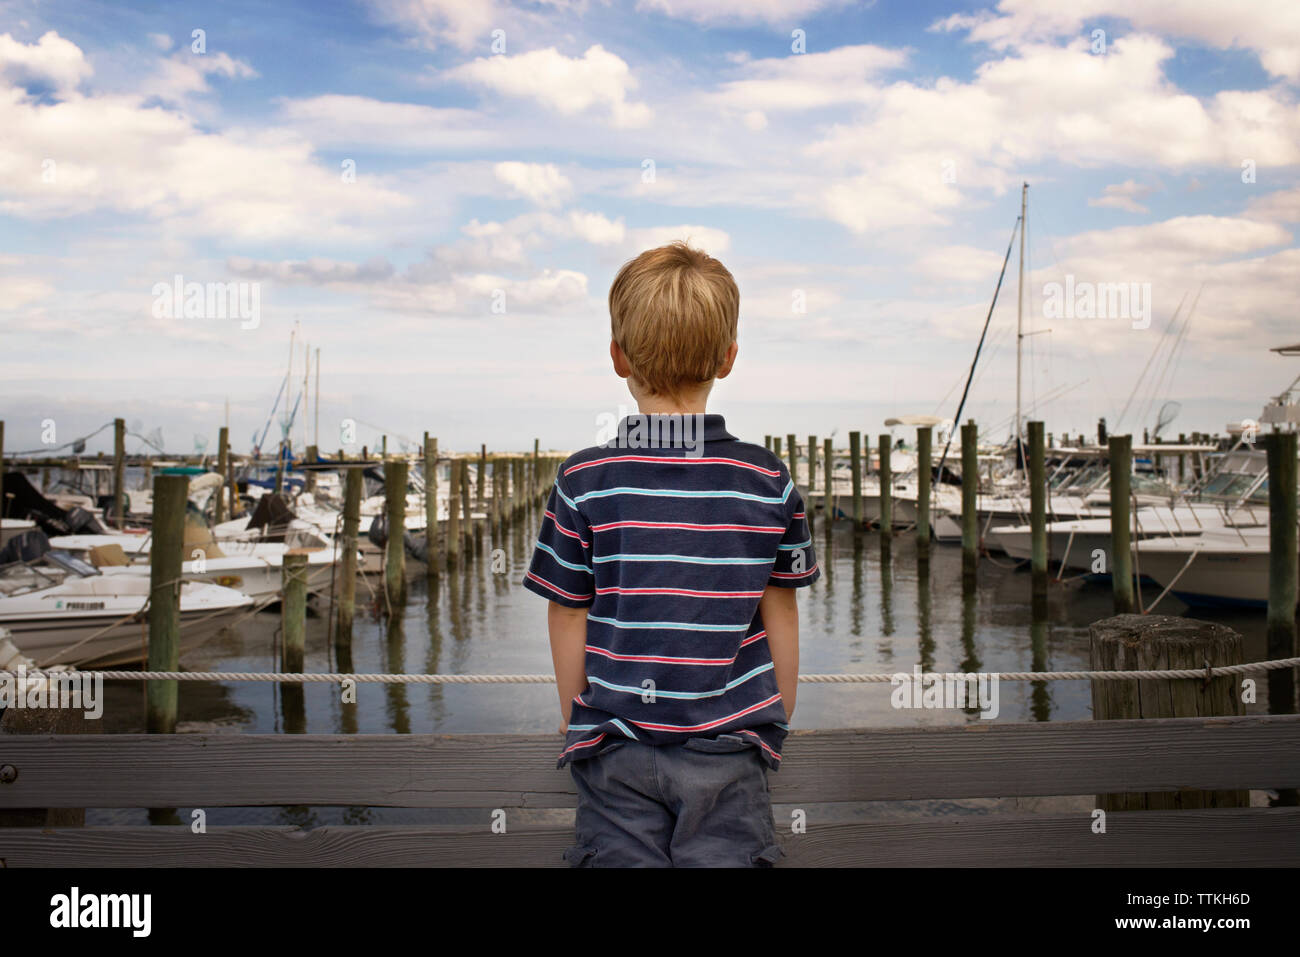 Rear view of boy standing on bridge by harbor against cloudy sky Stock Photo